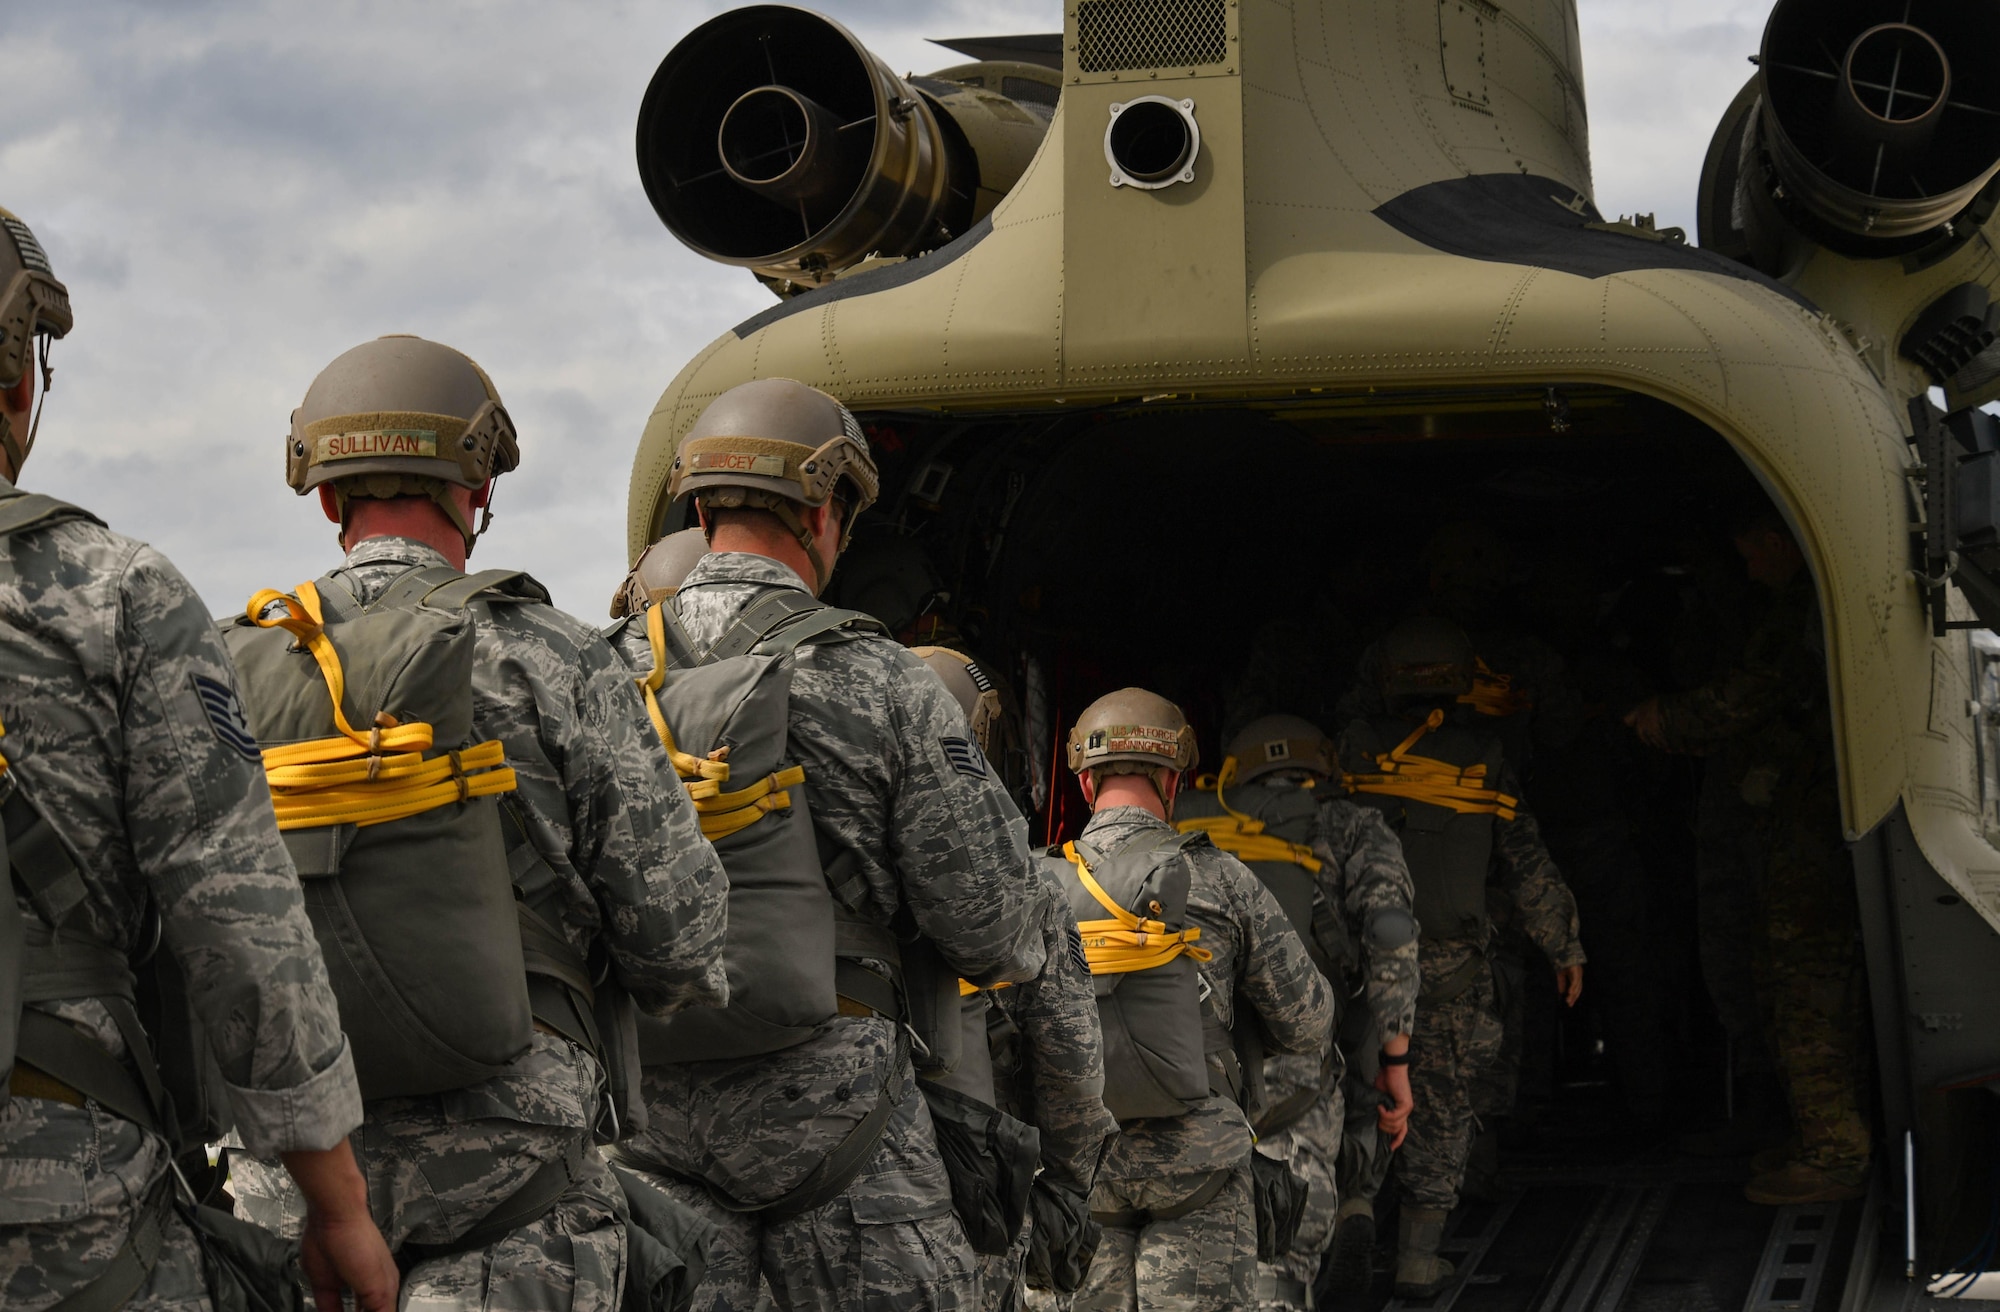 U.S. Air Force Airmen assigned to the 435th Contingency Response Group load into a U.S. Army CH-47 Chinook during exercise Saber Strike 17 at Lielvarde Air Base, Latvia, June 10, 2017. The 435th CRG sends paratroopers to austere locations to determine if an area can be safely used as an airfield. Saber Strike 17 promotes regional stability and security, while strengthening partner capabilities and fostering trust. (U.S Air Force photo by Senior Airman Tryphena Mayhugh)